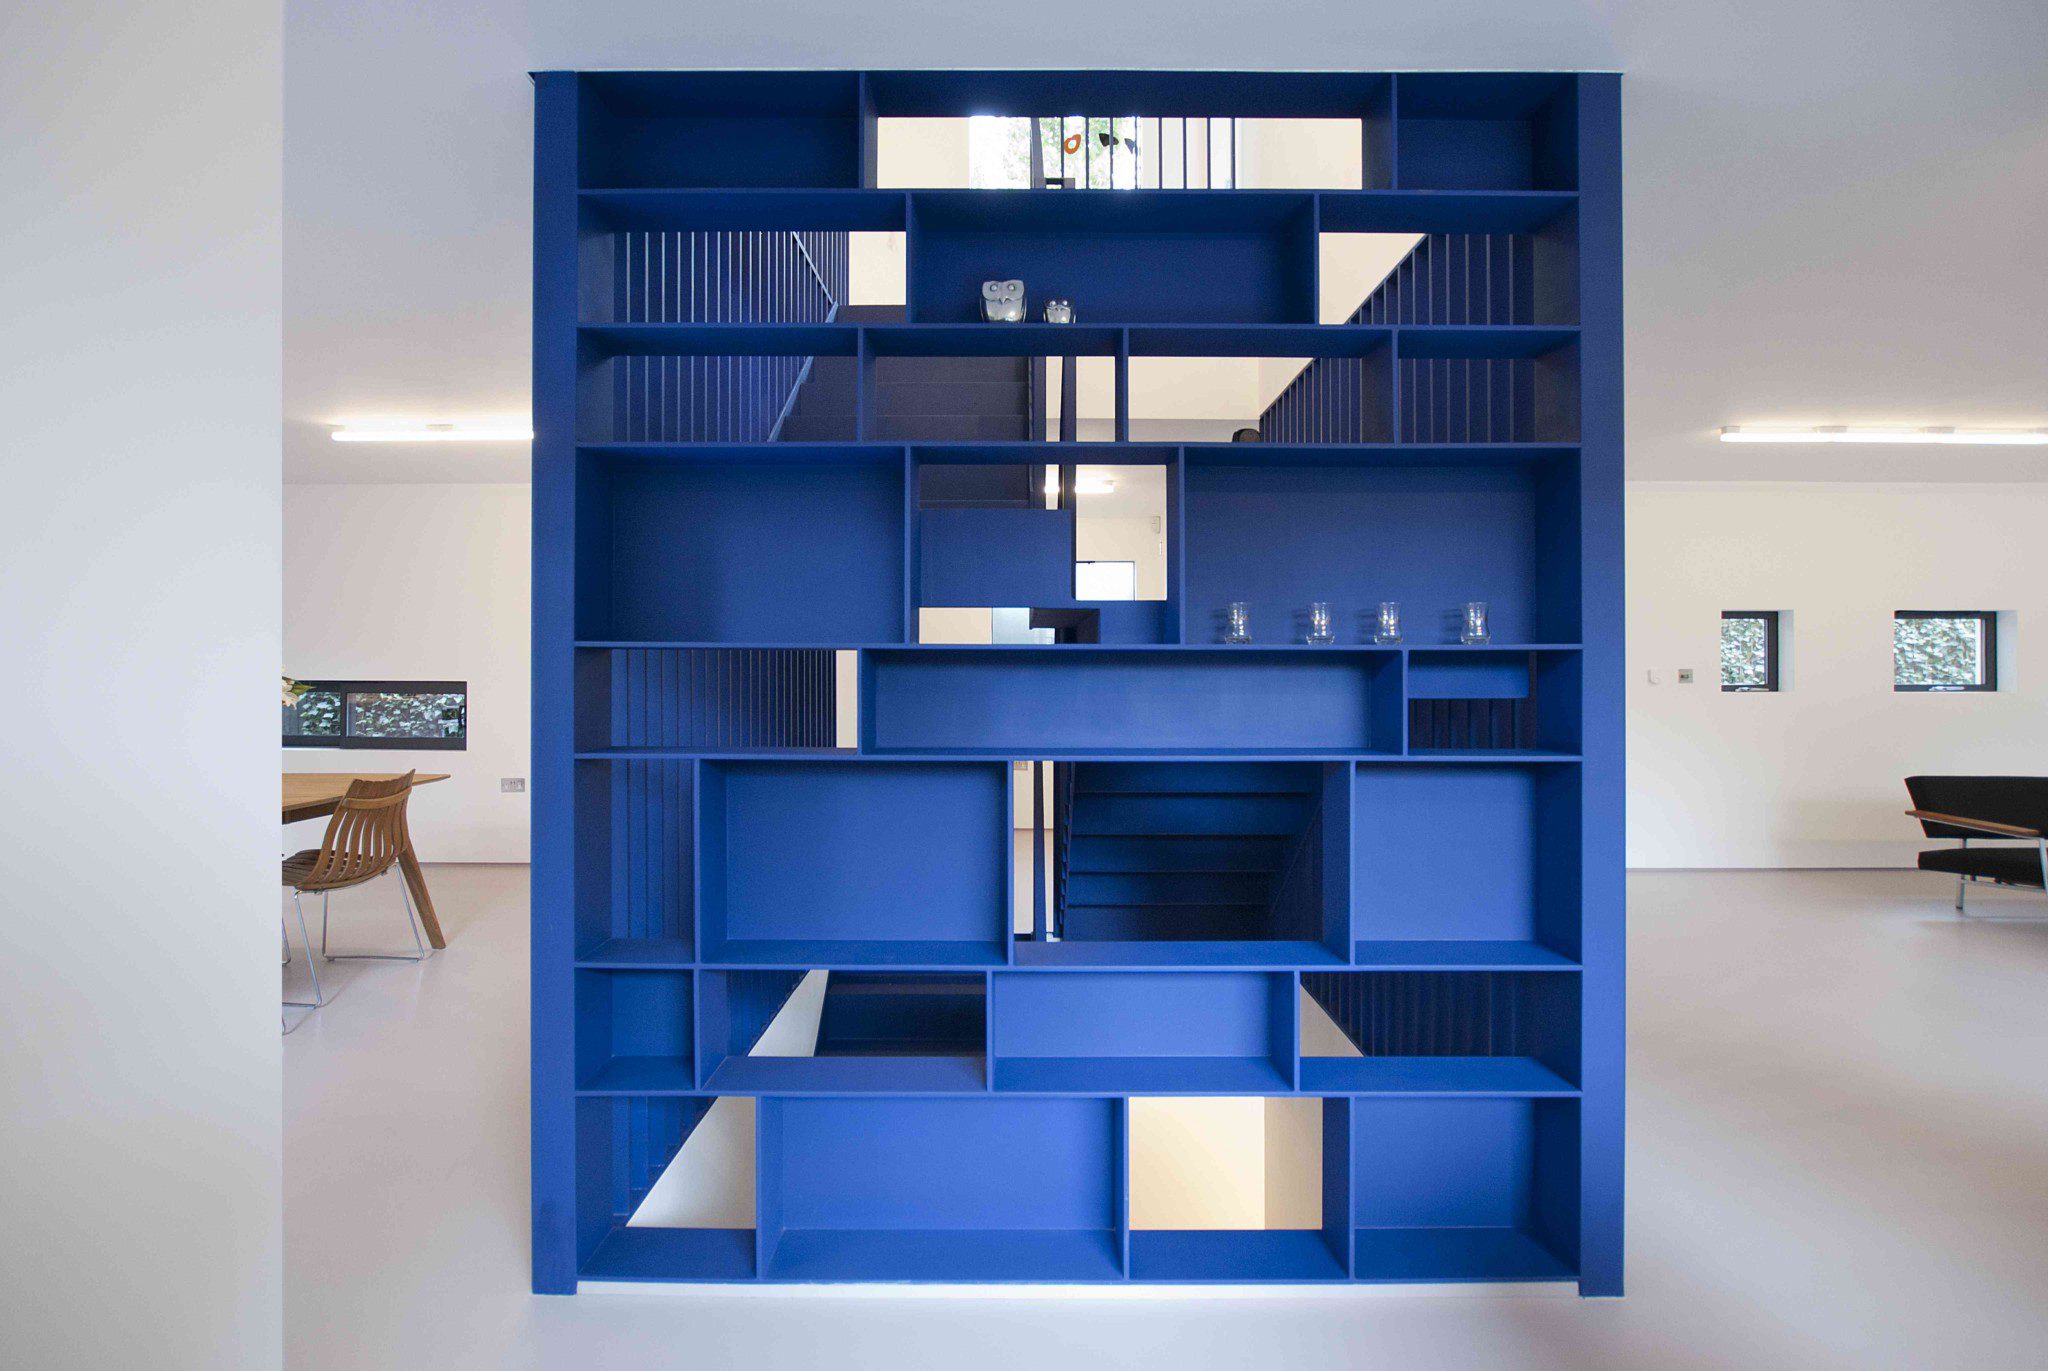 Fin House, London, RA Projects, 2015